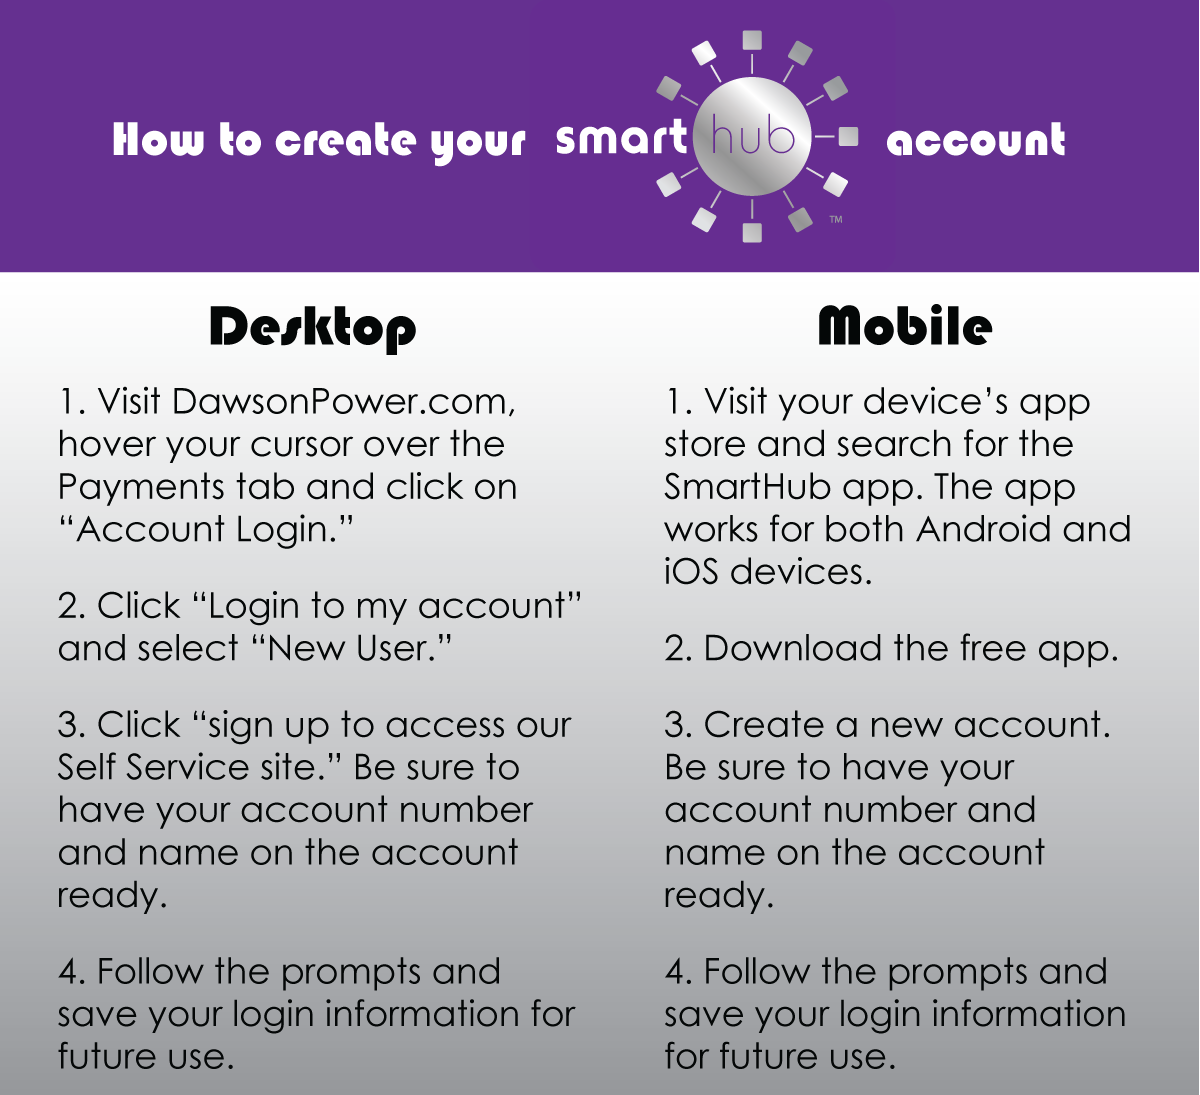 How to creat your smarthub account